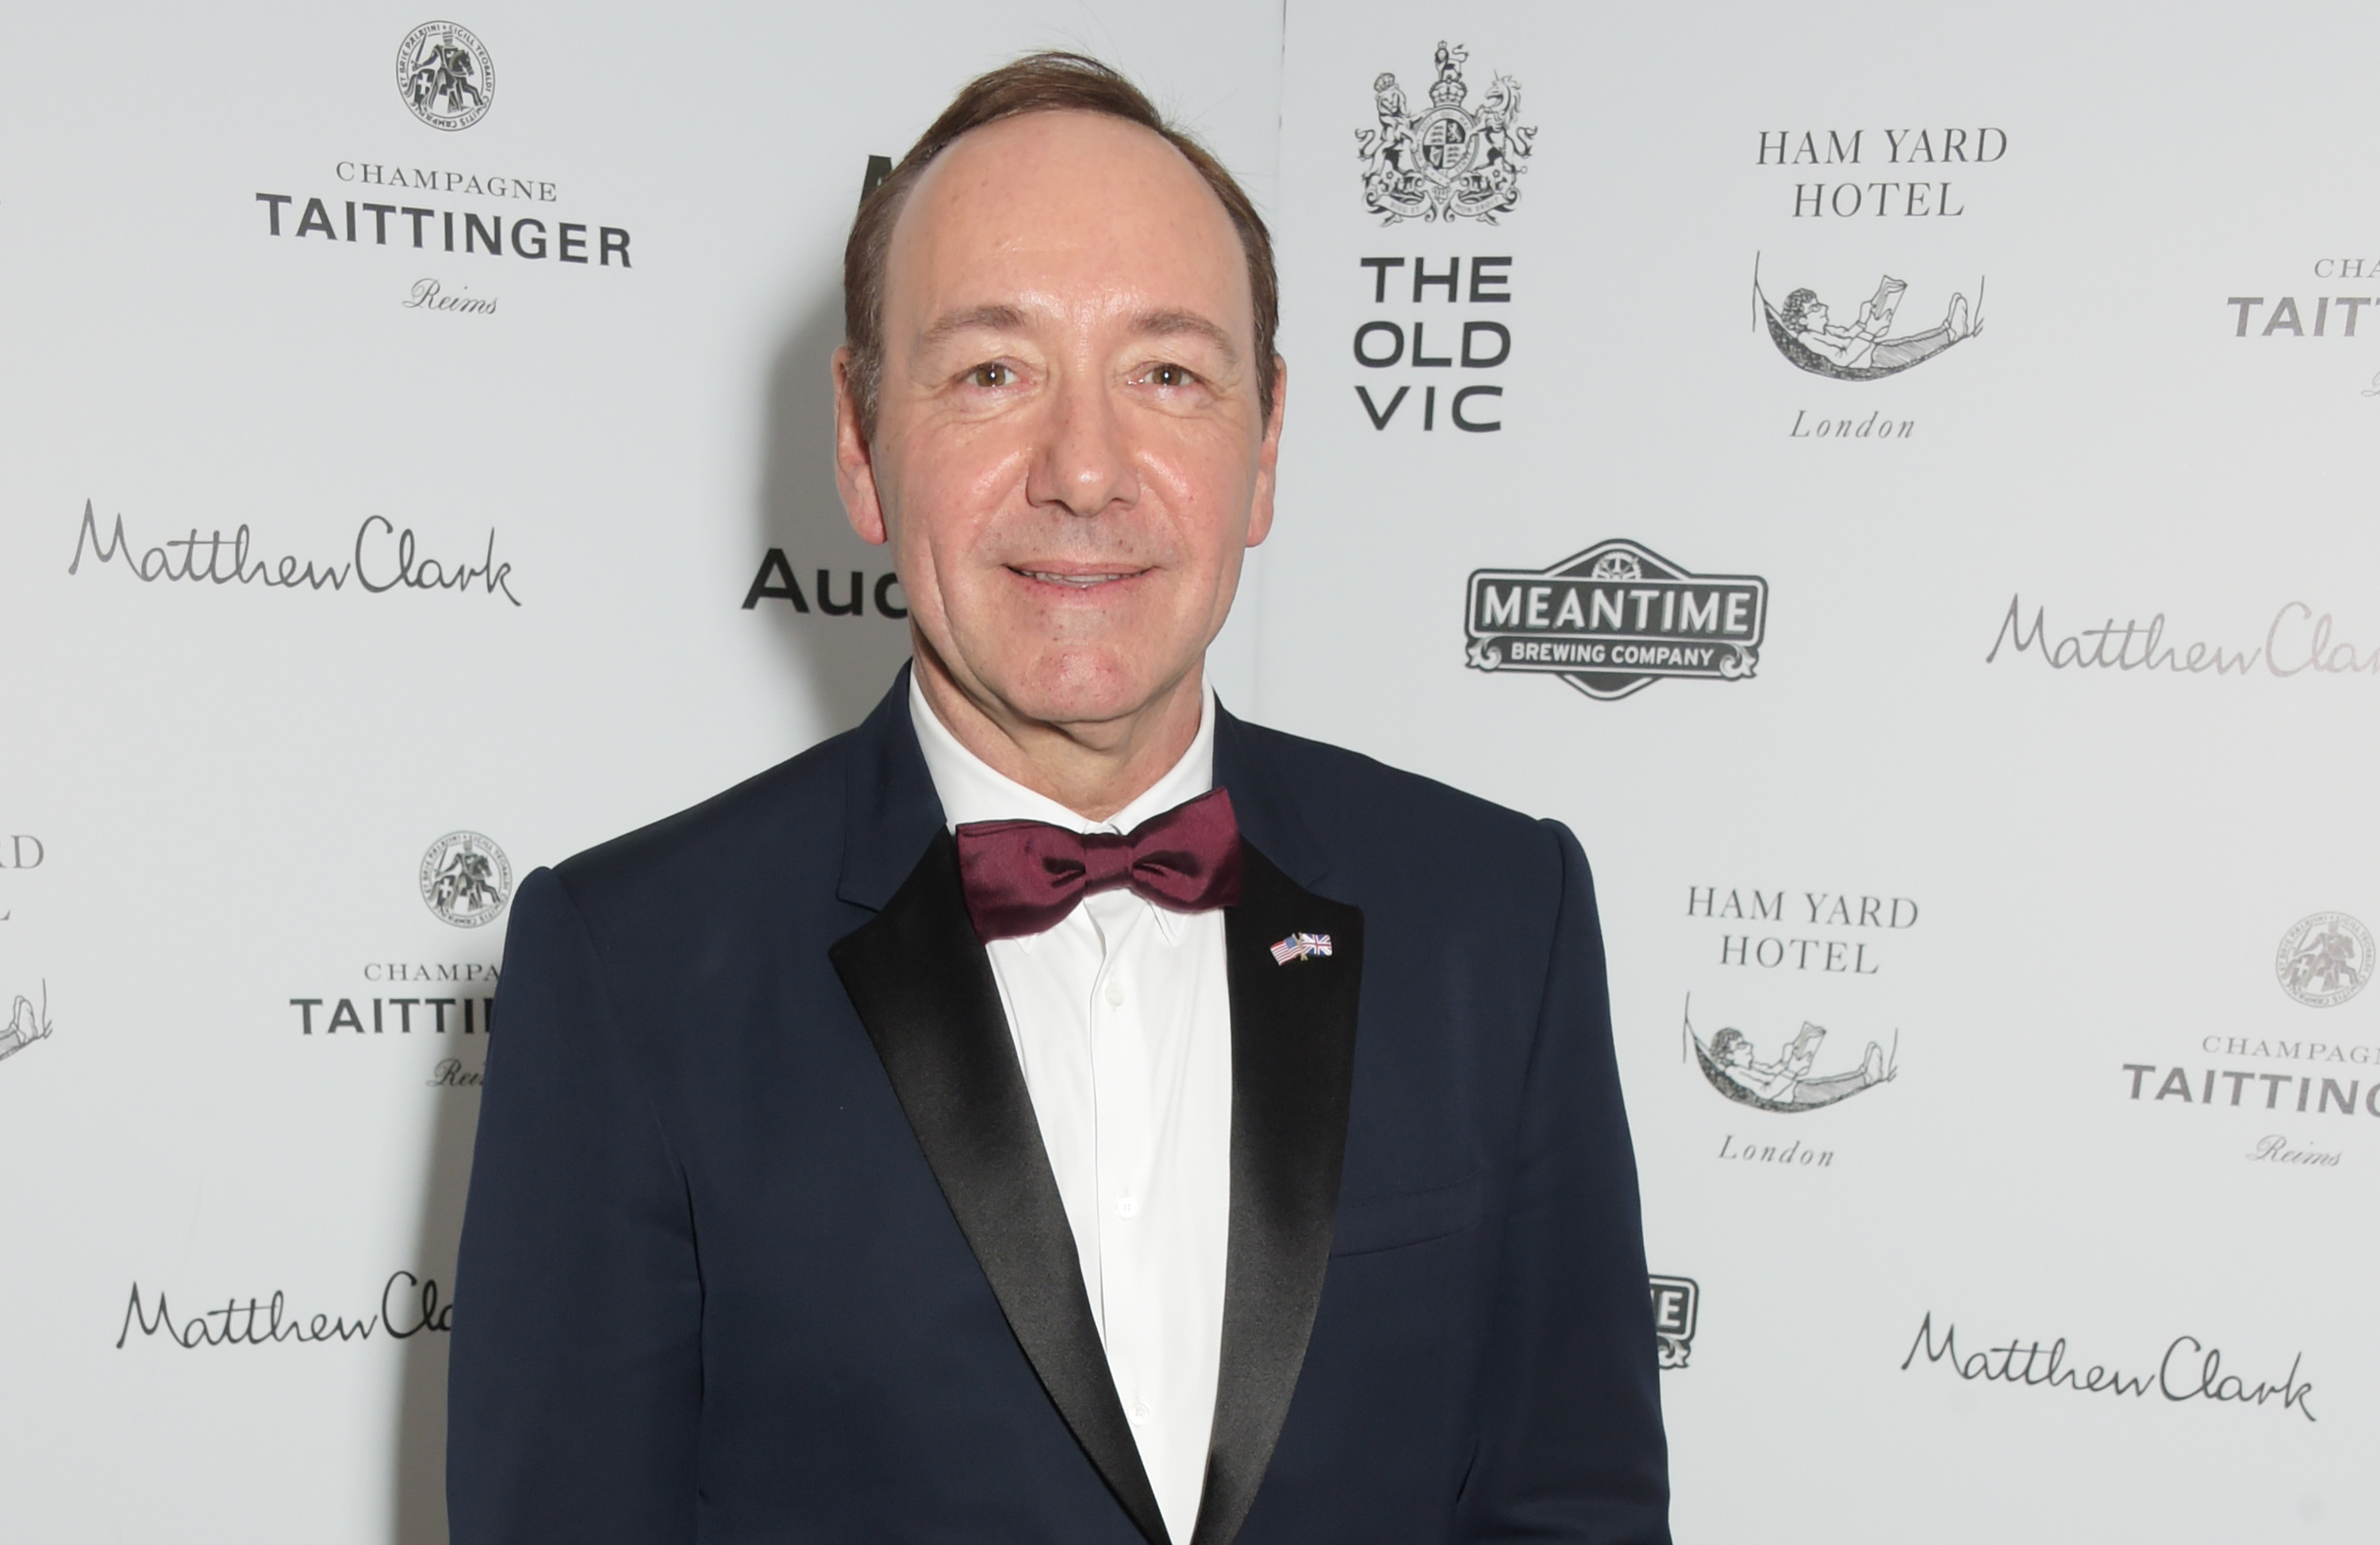 Former artistic director of The Old Vic Kevin Spacey at the After Party of The Old Vic's A Gala Celebration in Honour of Kevin Spacey on April 19, 2015 in London, England (David M. Benett—Getty Images)